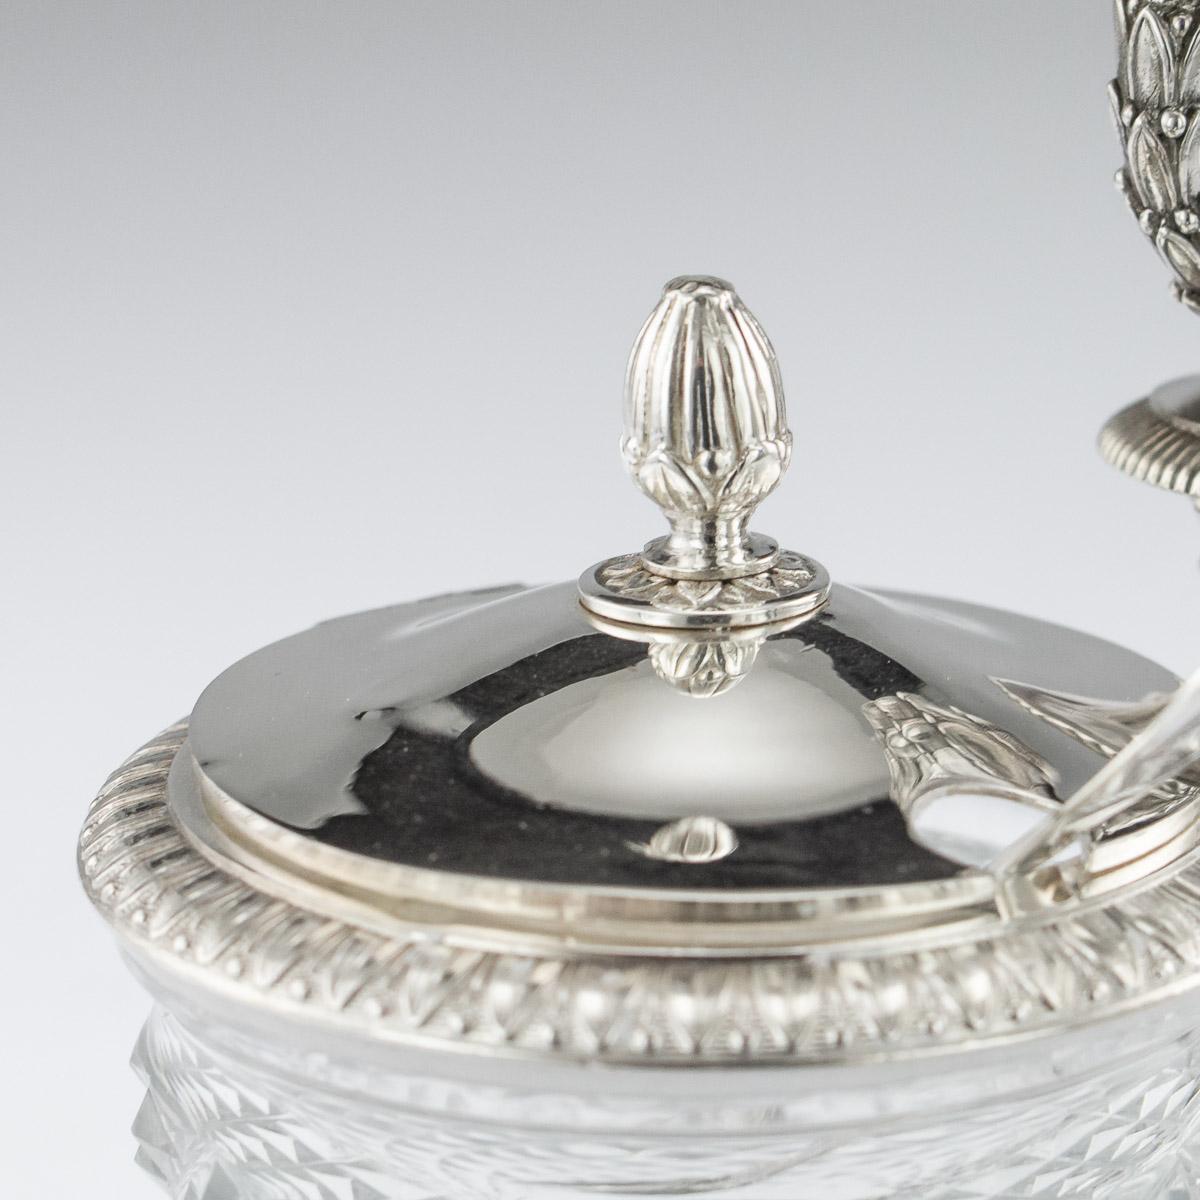 19th Century French Solid Silver & Glass Condiments Service, Paris, c.1830 15